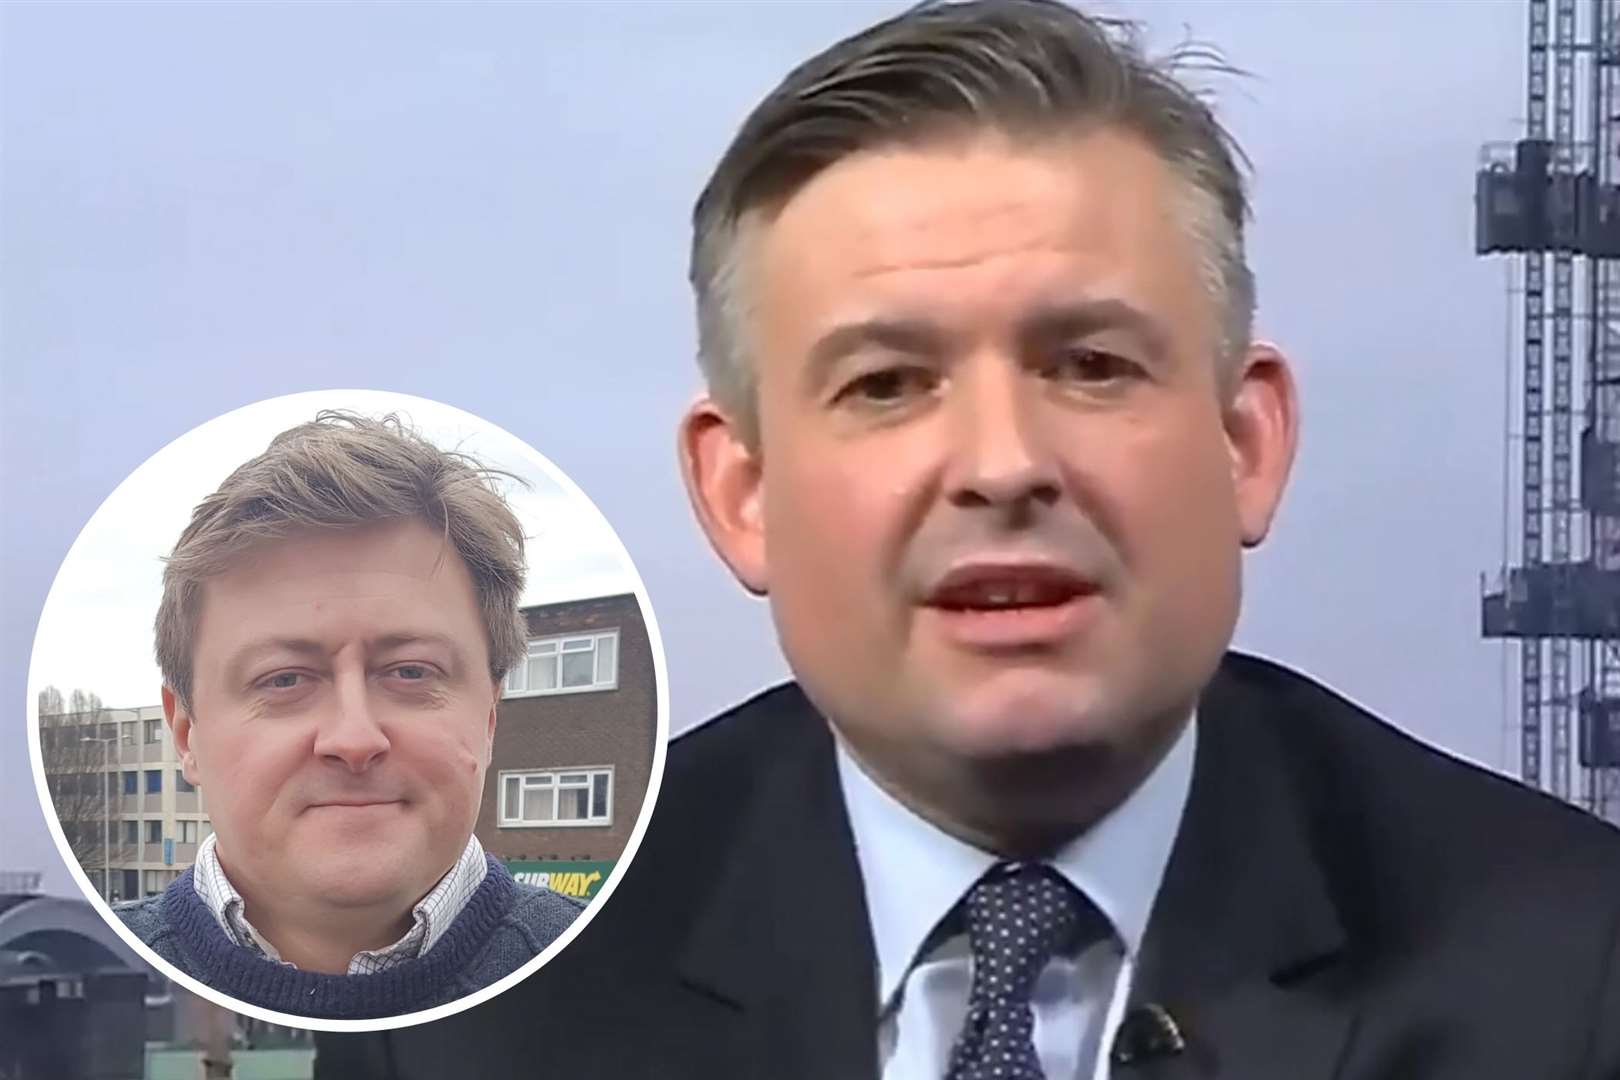 Jonathan Ashworth claims Greig Baker, inset, leaked their conversation